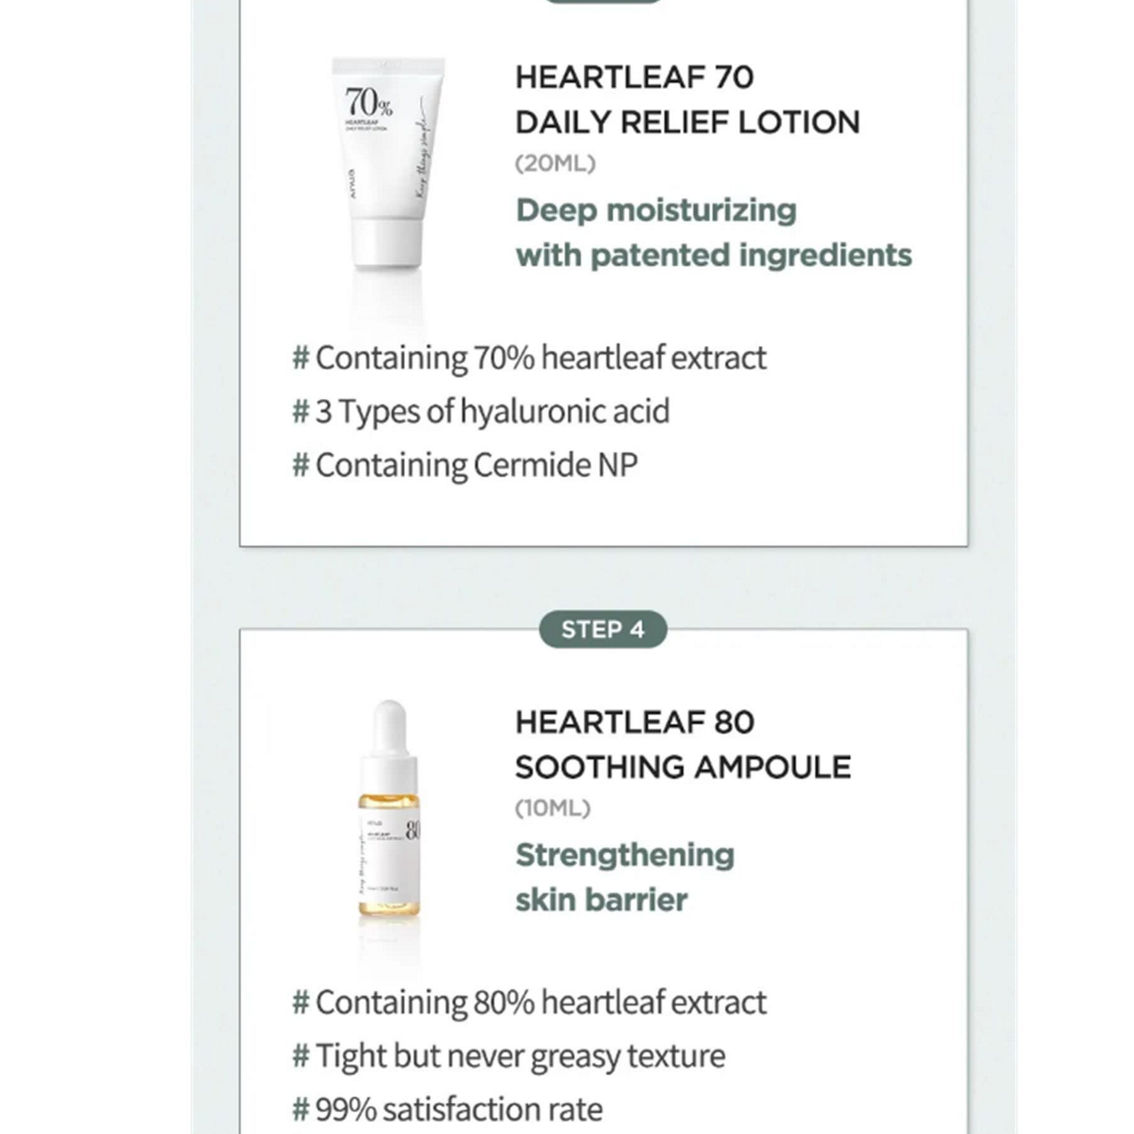 ANUA Heartleaf Soothing Trial Kit - Image 4 of 4